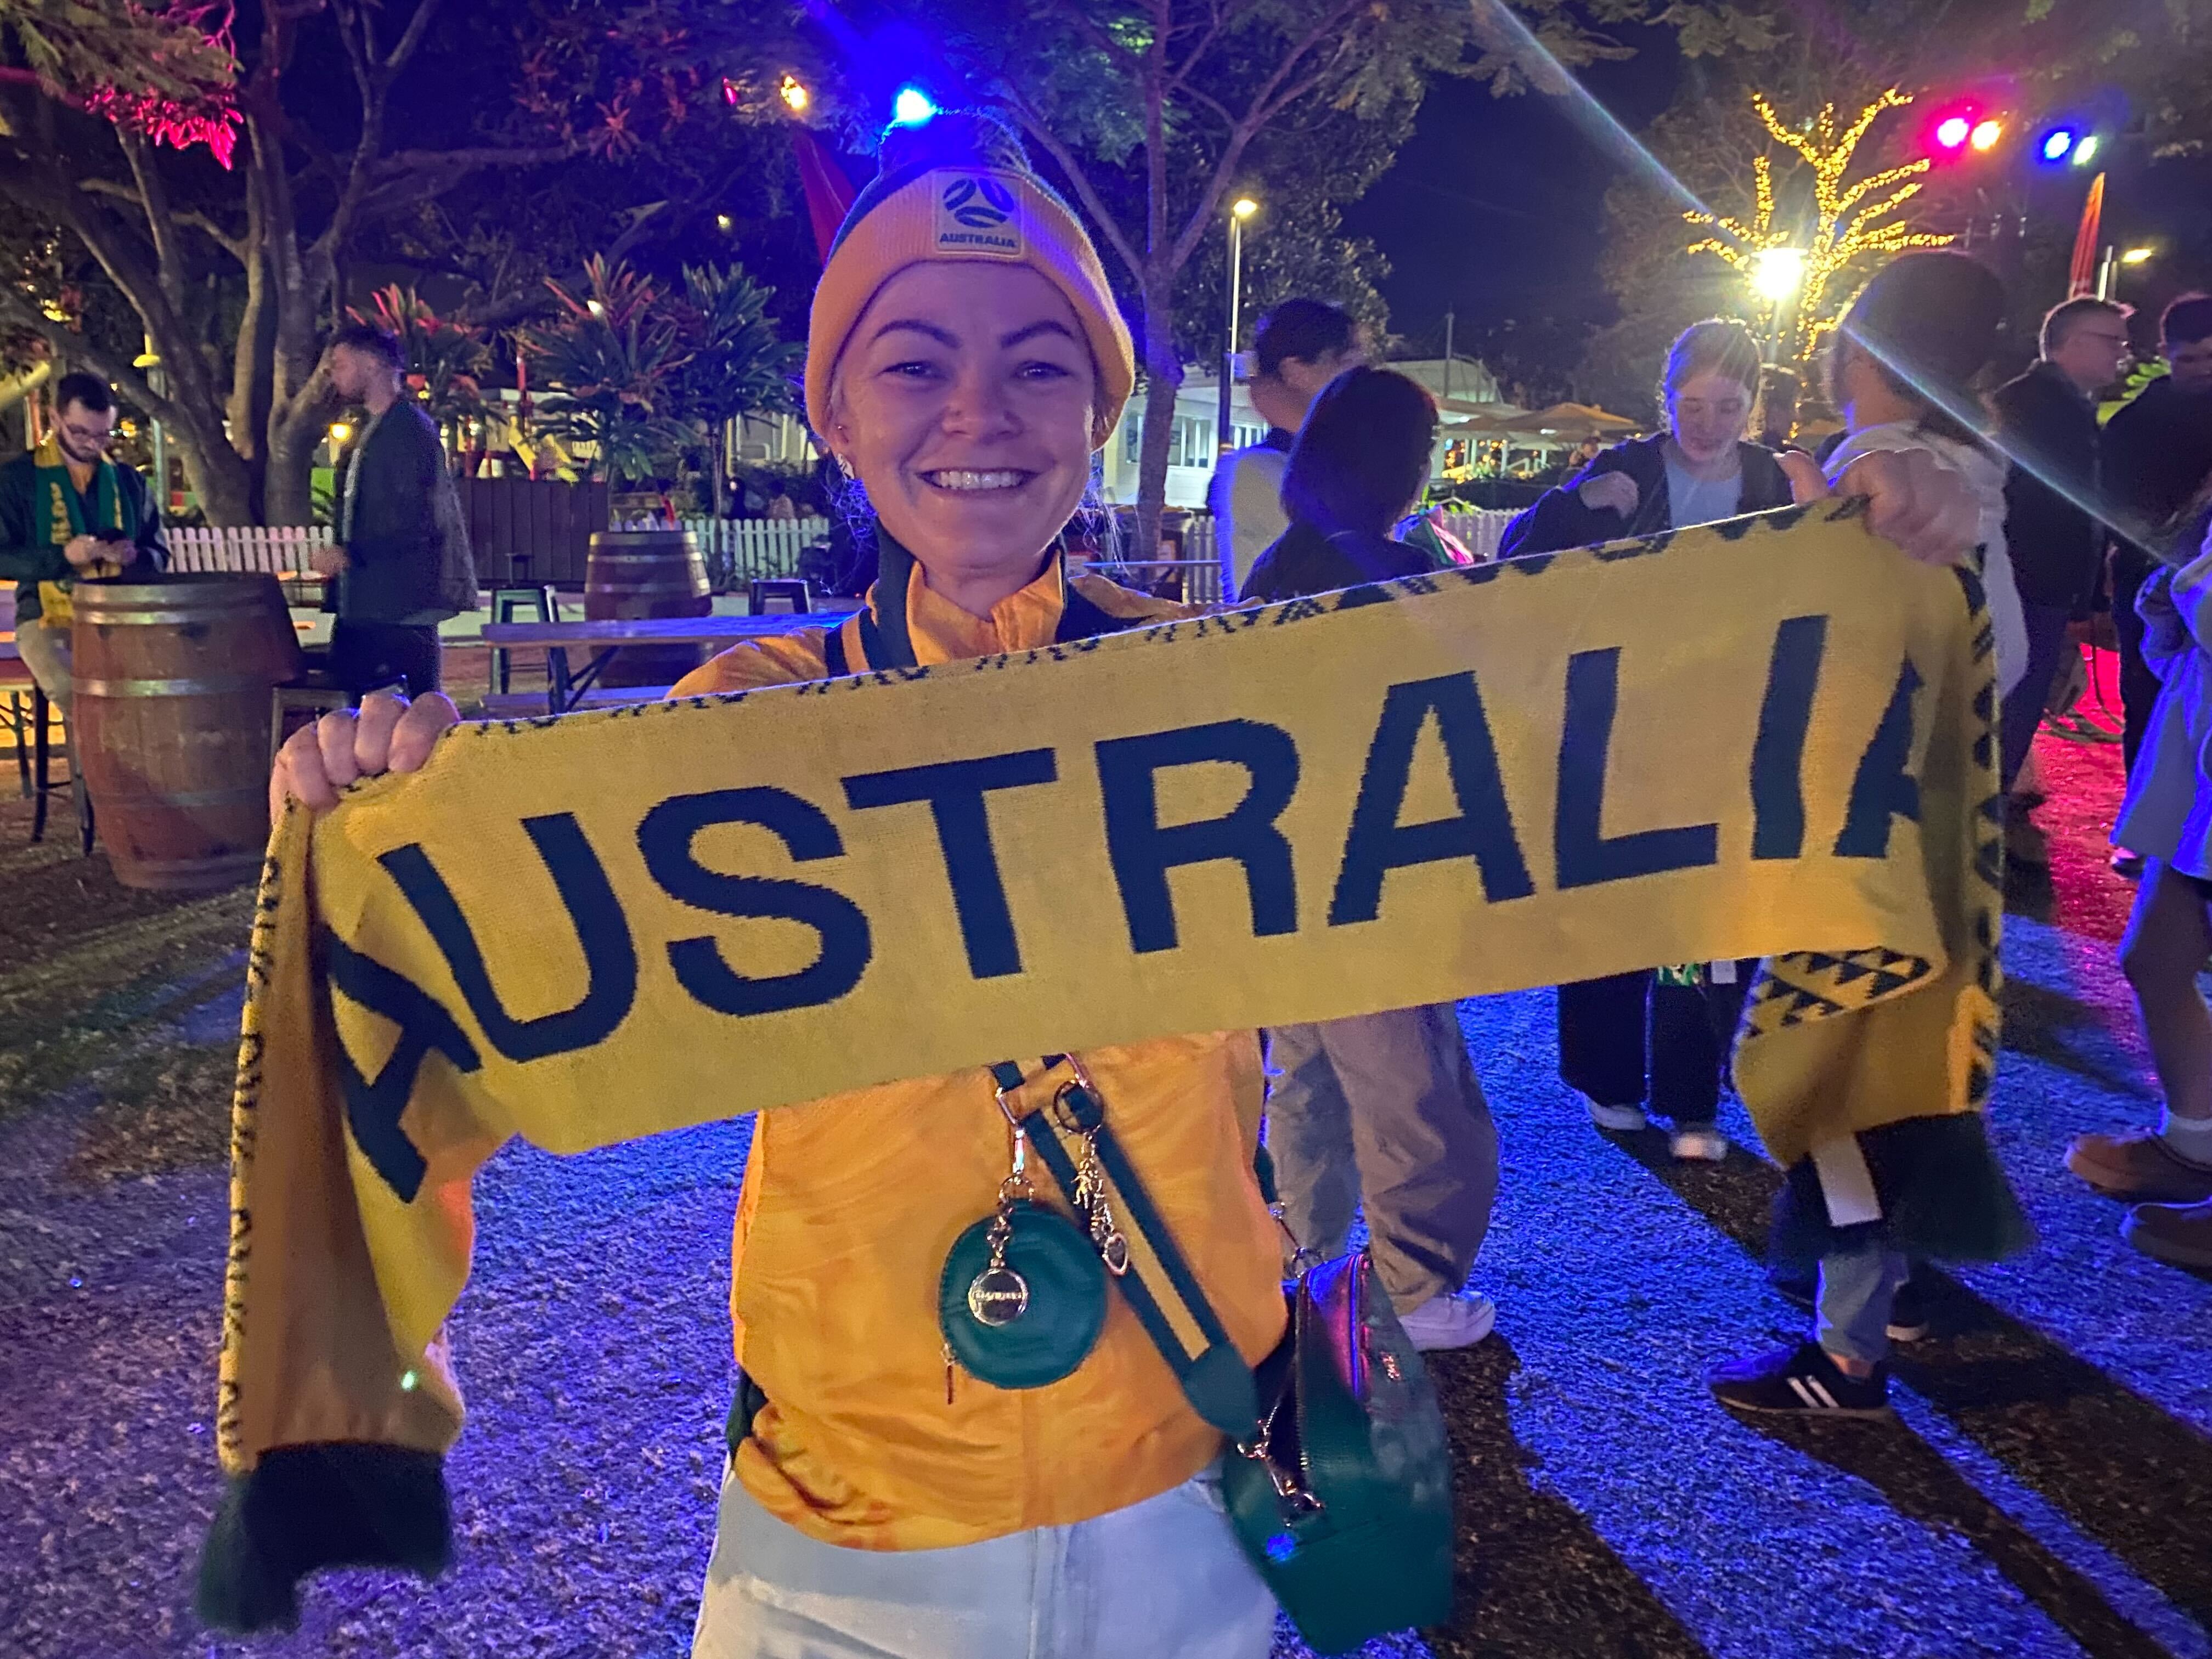 Matildas fan Vanessa Spagen was beaming after the Australia 4-0 victory over Canada.